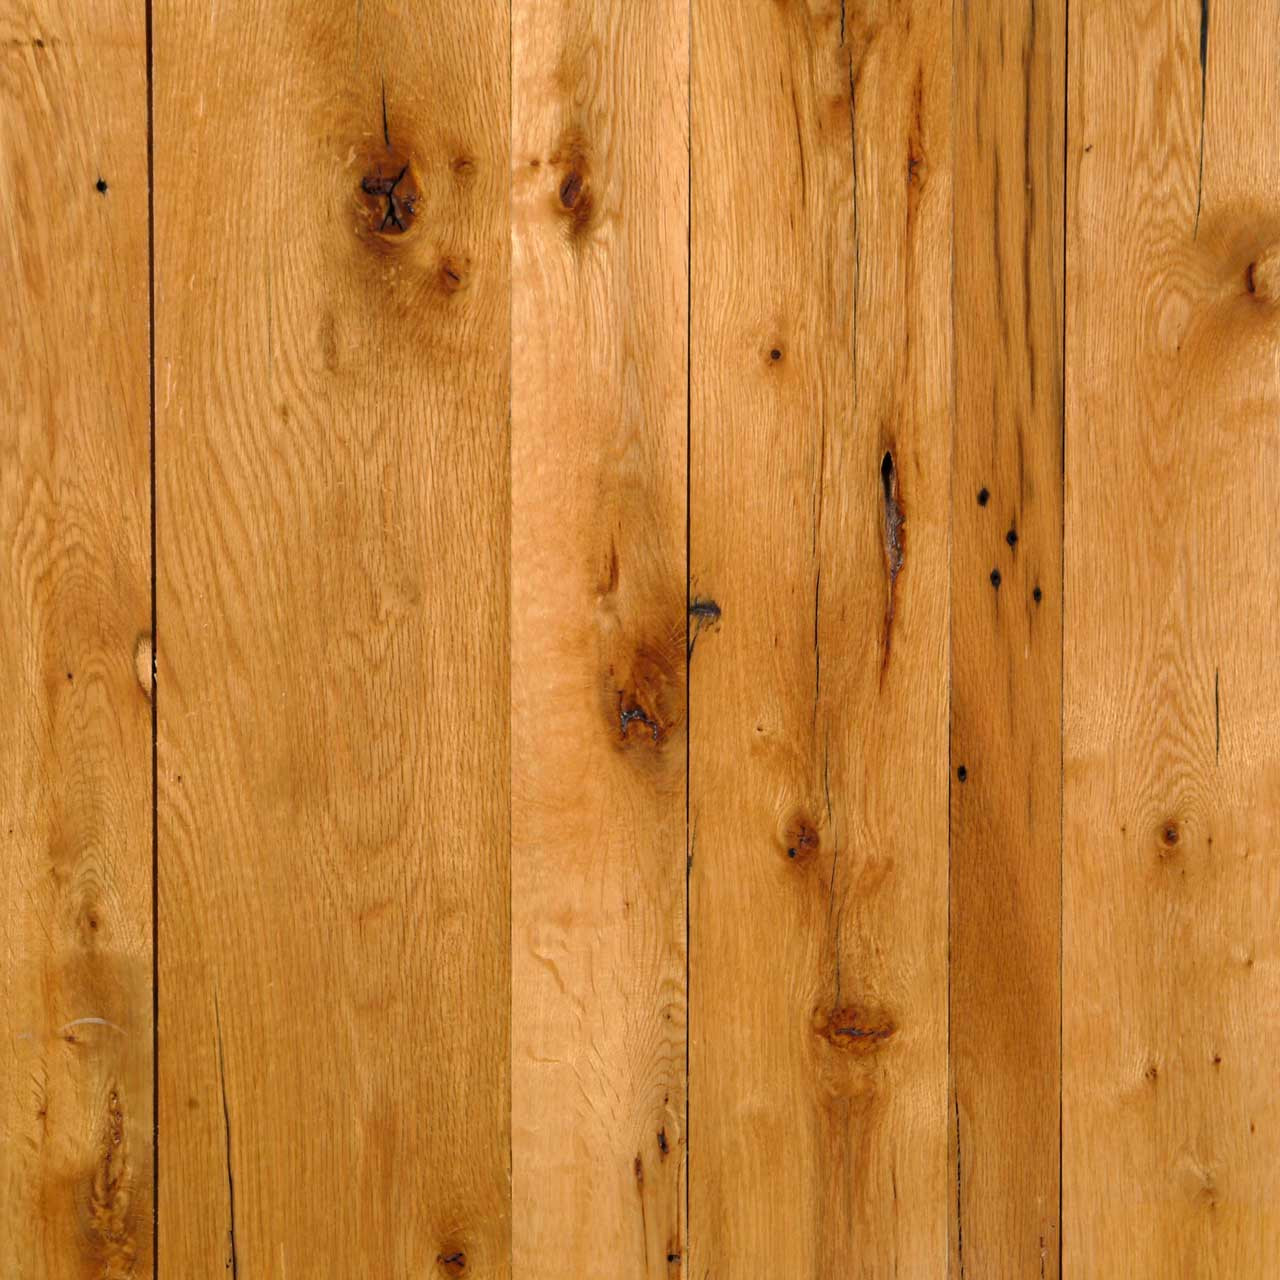 13 attractive wholesale Hardwood Flooring Online 2024 free download wholesale hardwood flooring online of reclaimed red white reclaimed oak flooring as cheap laminate within reclaimed red white reclaimed oak flooring as cheap laminate flooring